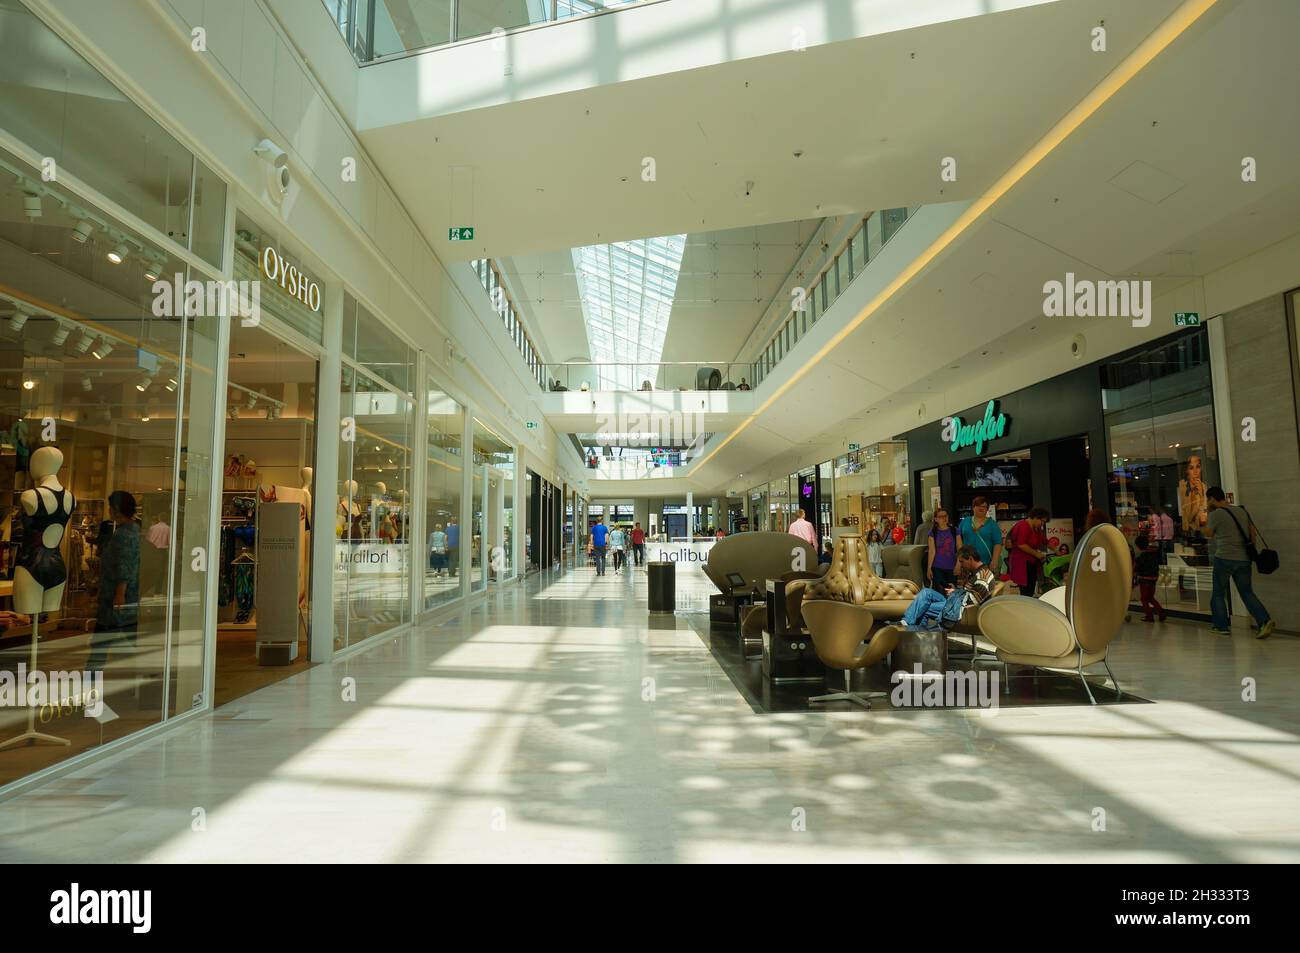 Posnania Shopping Mall High Resolution Stock Photography and Images - Alamy